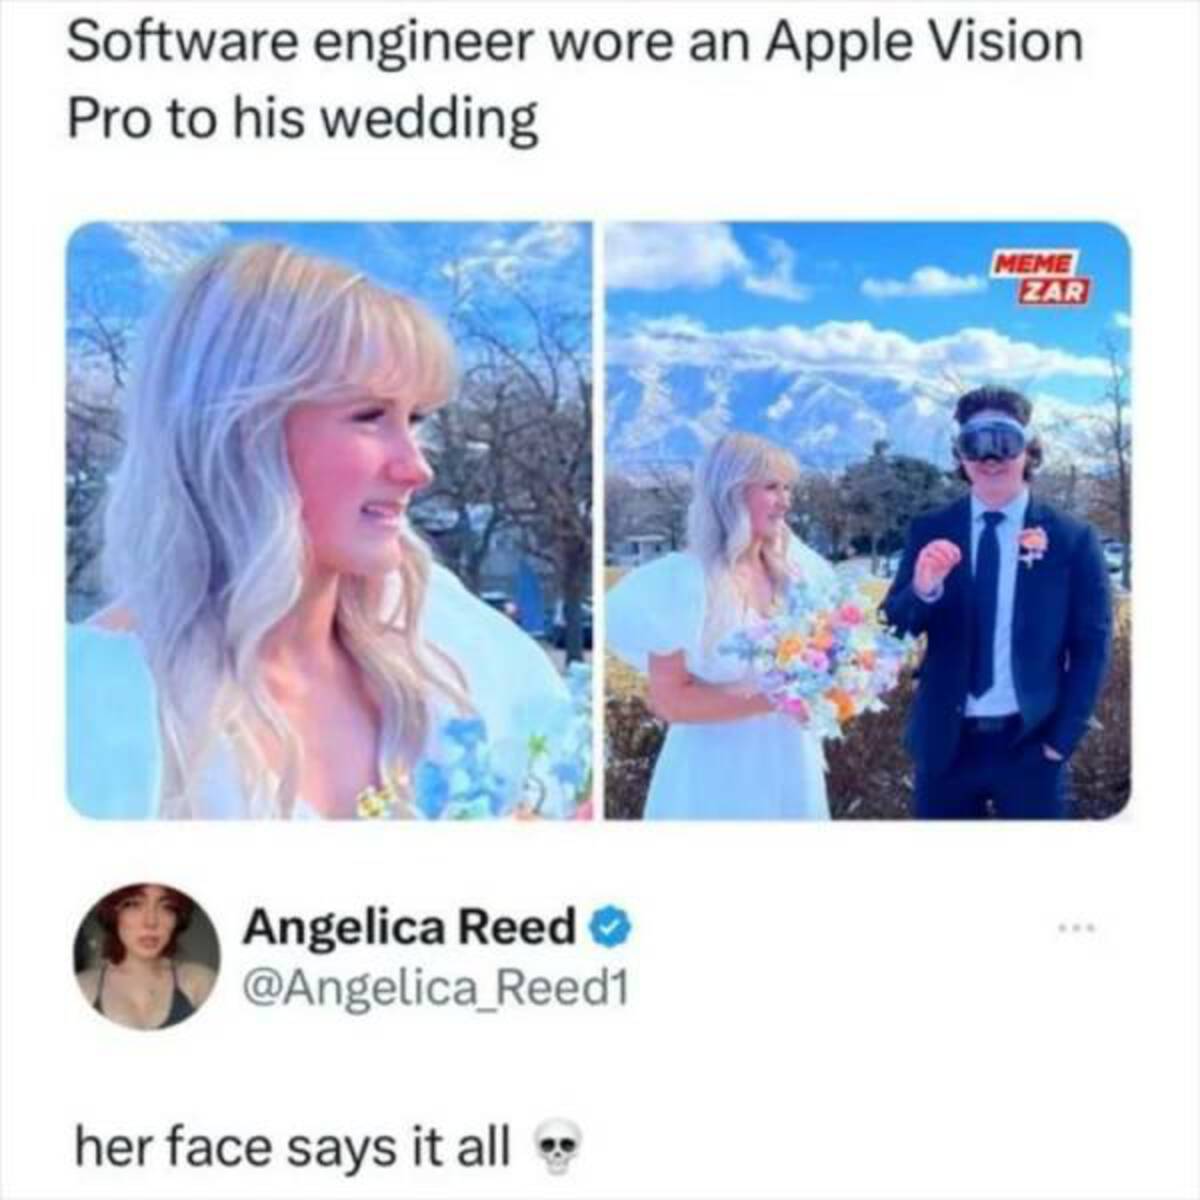 media - Software engineer wore an Apple Vision Pro to his wedding Angelica Reed her face says it all Meme Zar